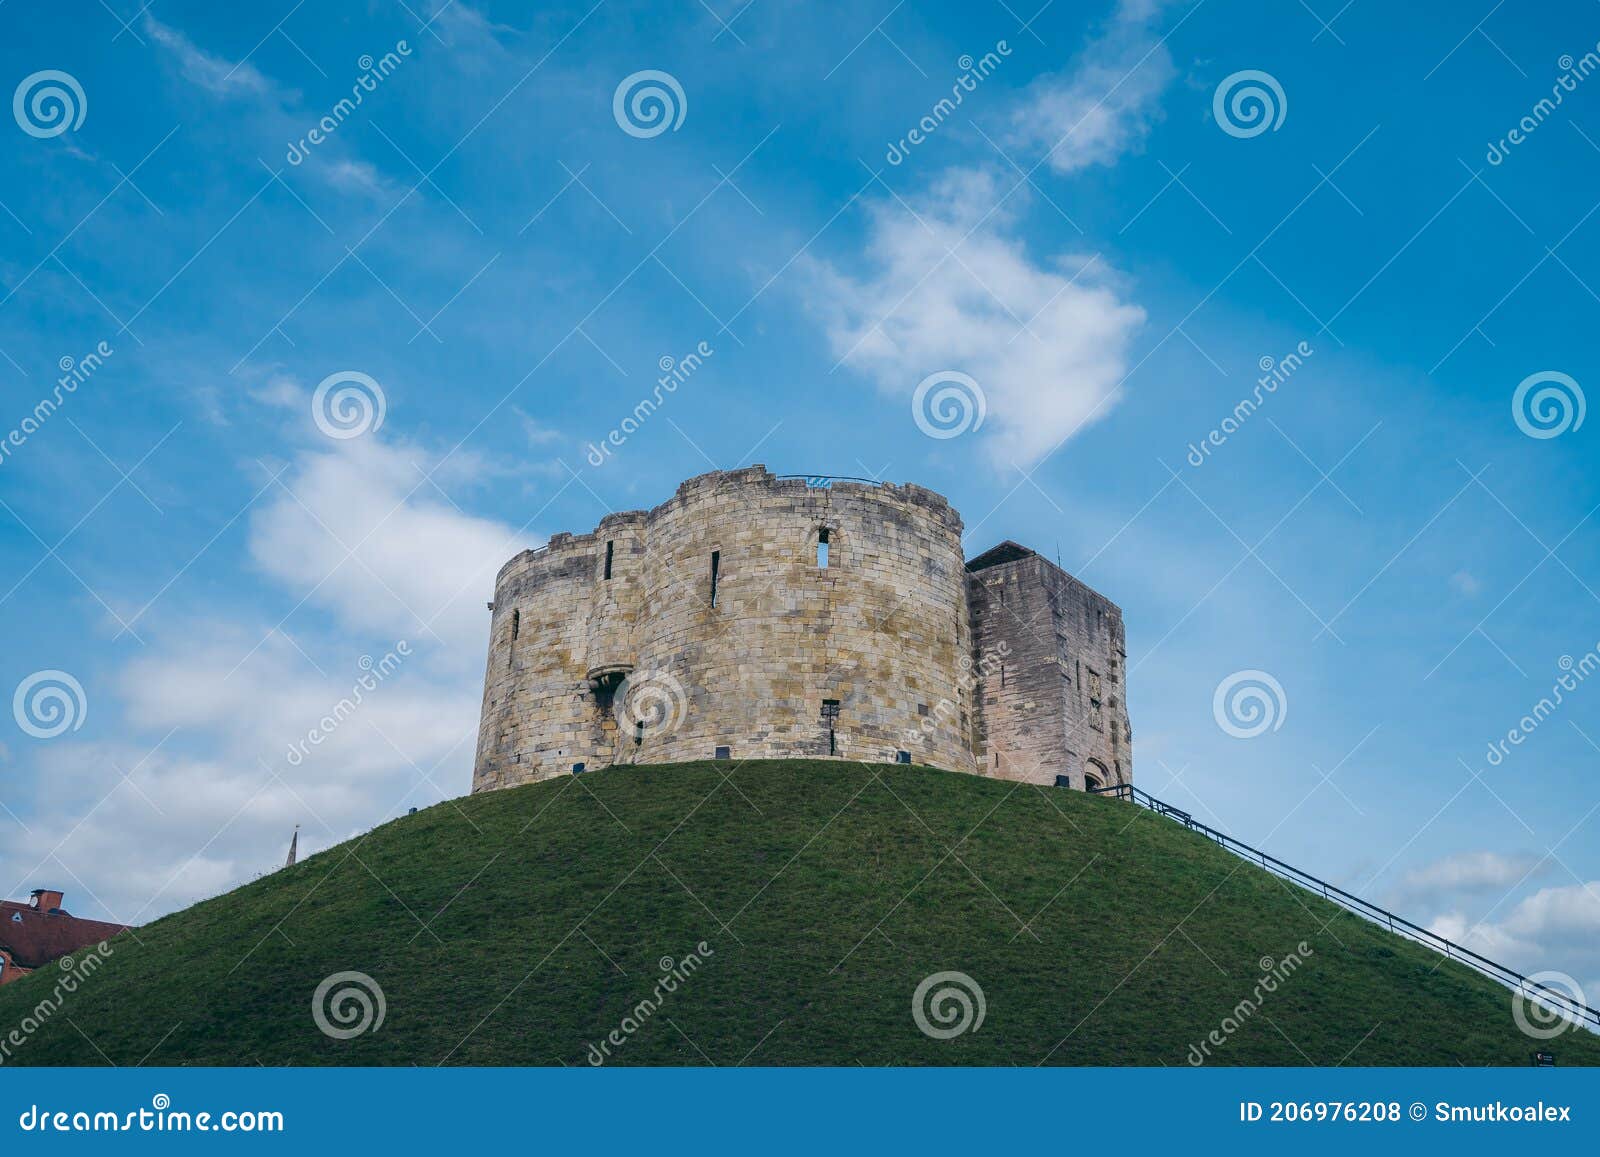 clifford`s tower, the 13th-century castle keep, built on a grass mound, formerly used as a prison and royal mint